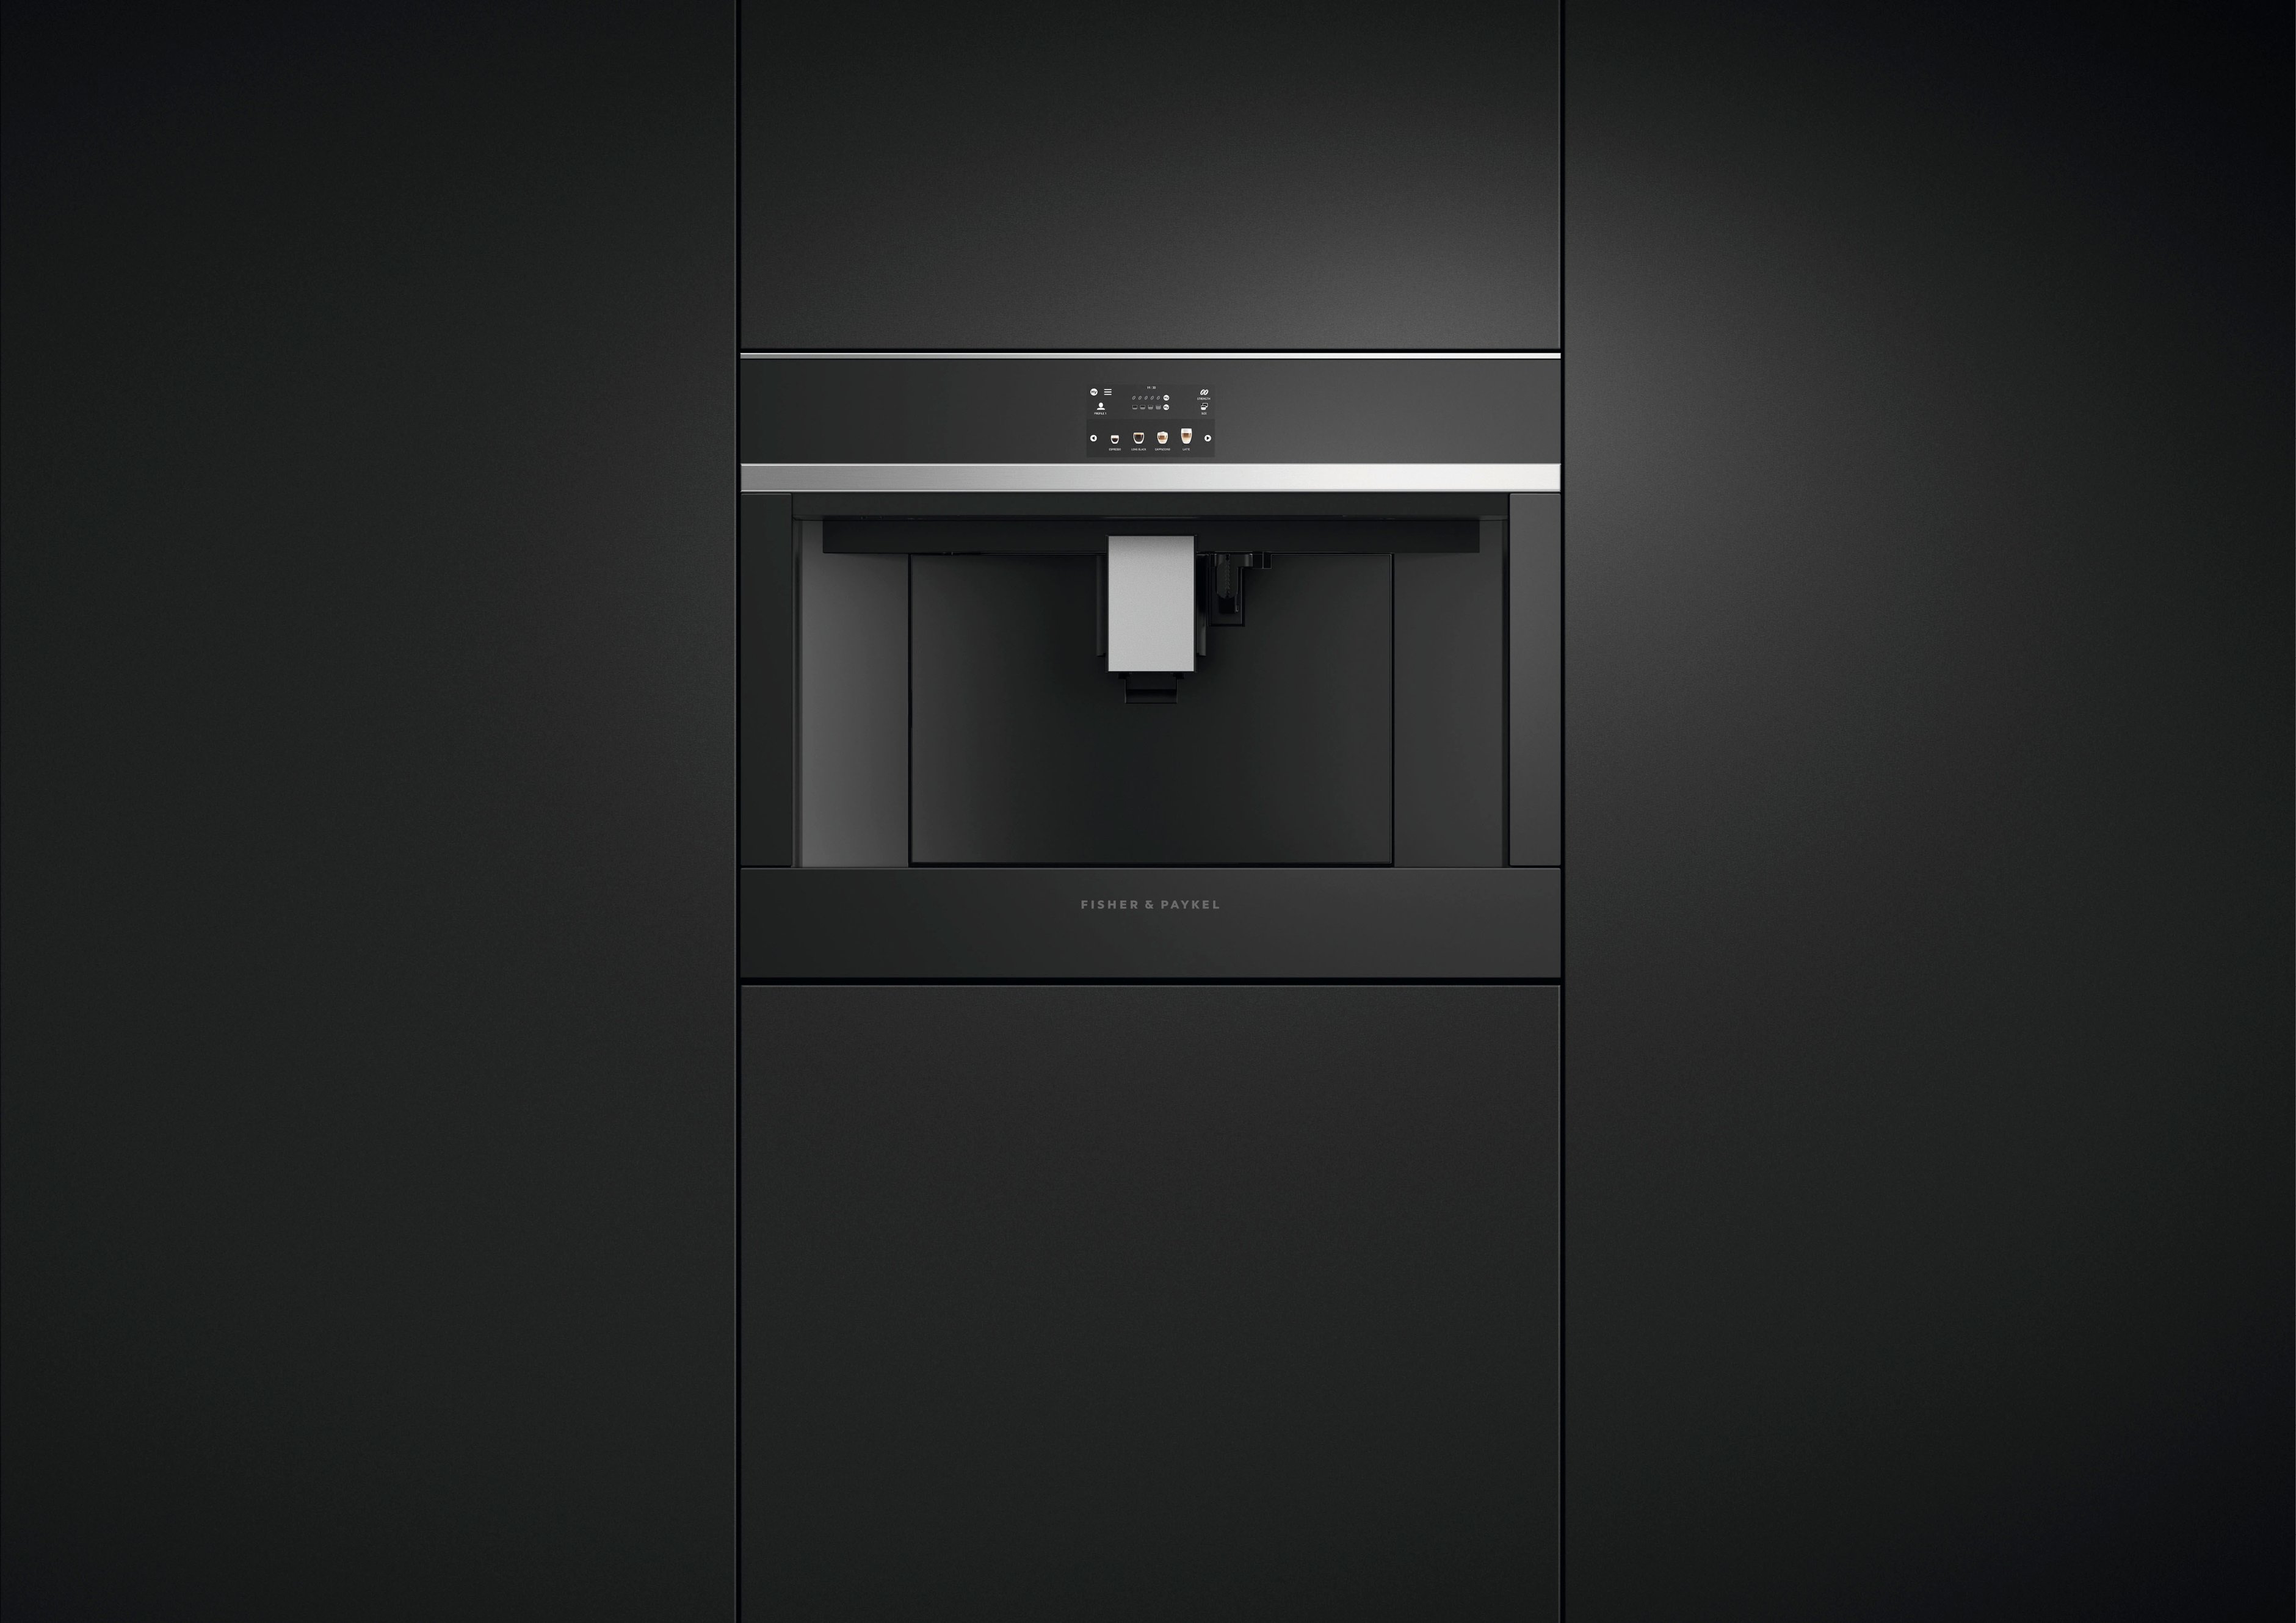 Photos - Built-In Coffee Maker Fisher & Paykel  24" Coffee Maker with Self-Cleaning Function - Black Gla 